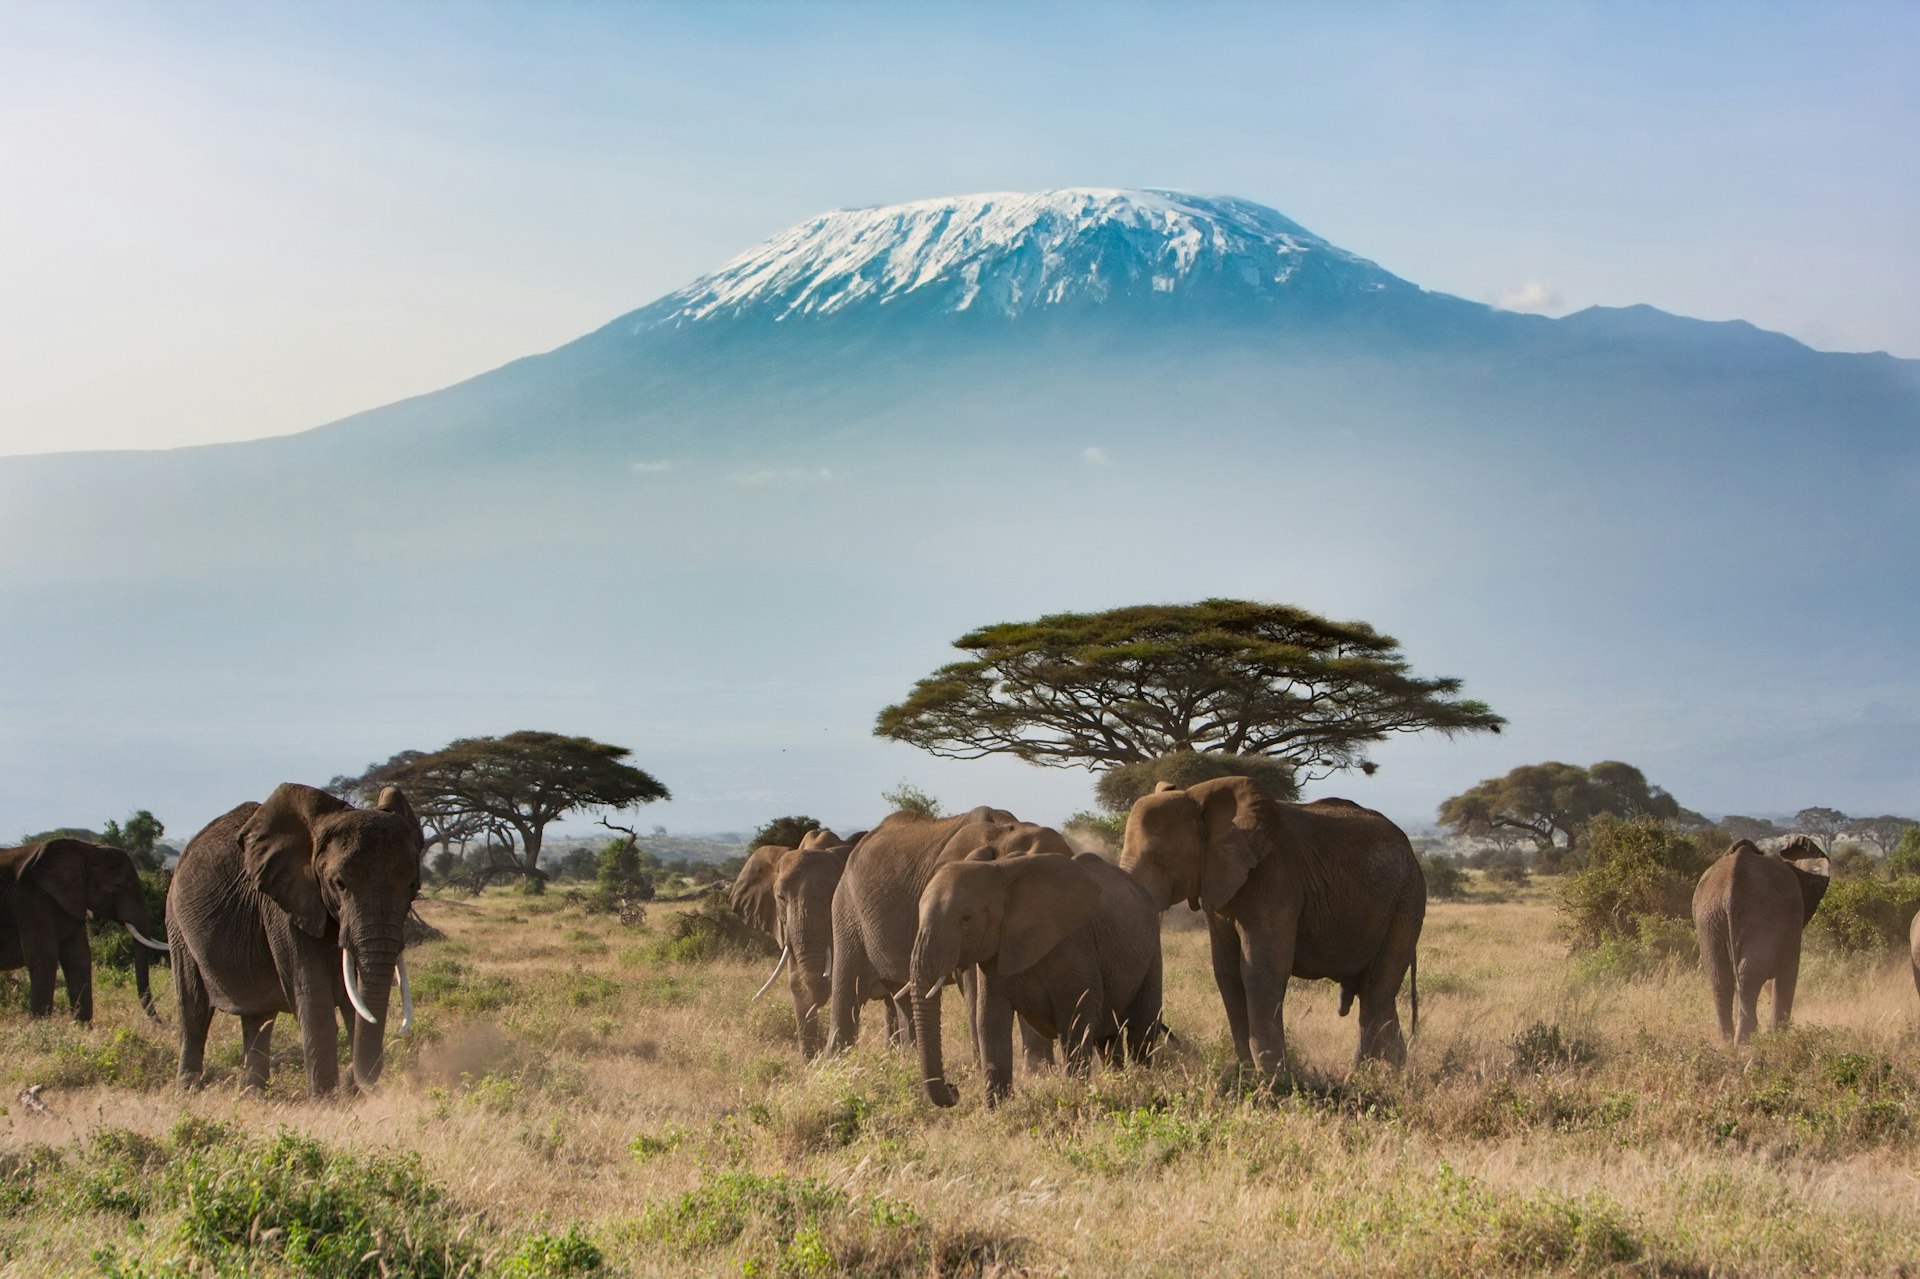 A herd of elephants stand on the grassy plains, with the snow-capped summit of Kilimanjaro standing as a backdrop.